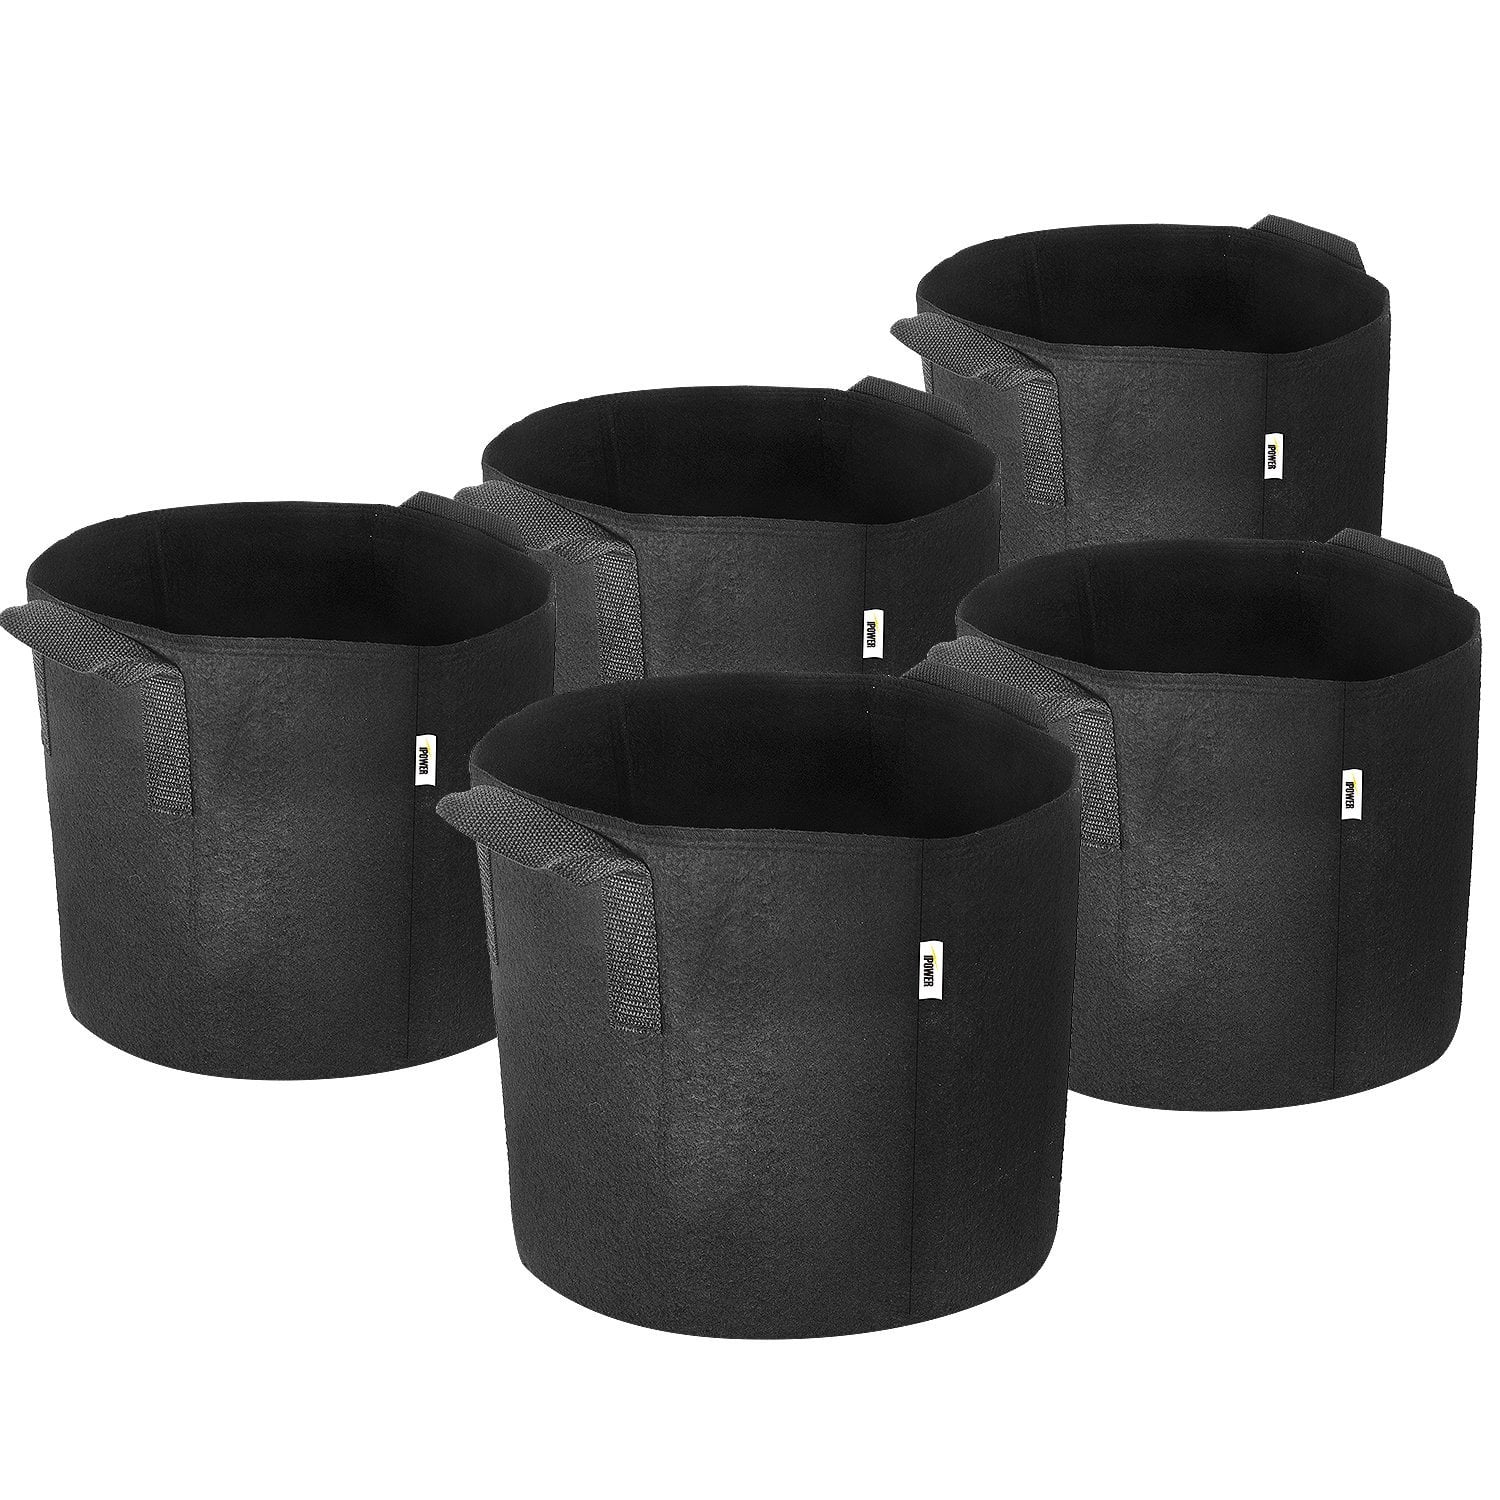 Soft-Sided Plant Pots 5 Pack - Grow Bags With Soft Felt-Like Texture That Promote Aeration Indoor & Outdoor Gardening For Flower & Vegetable Planting Container With Sturdy Handles 5 litres